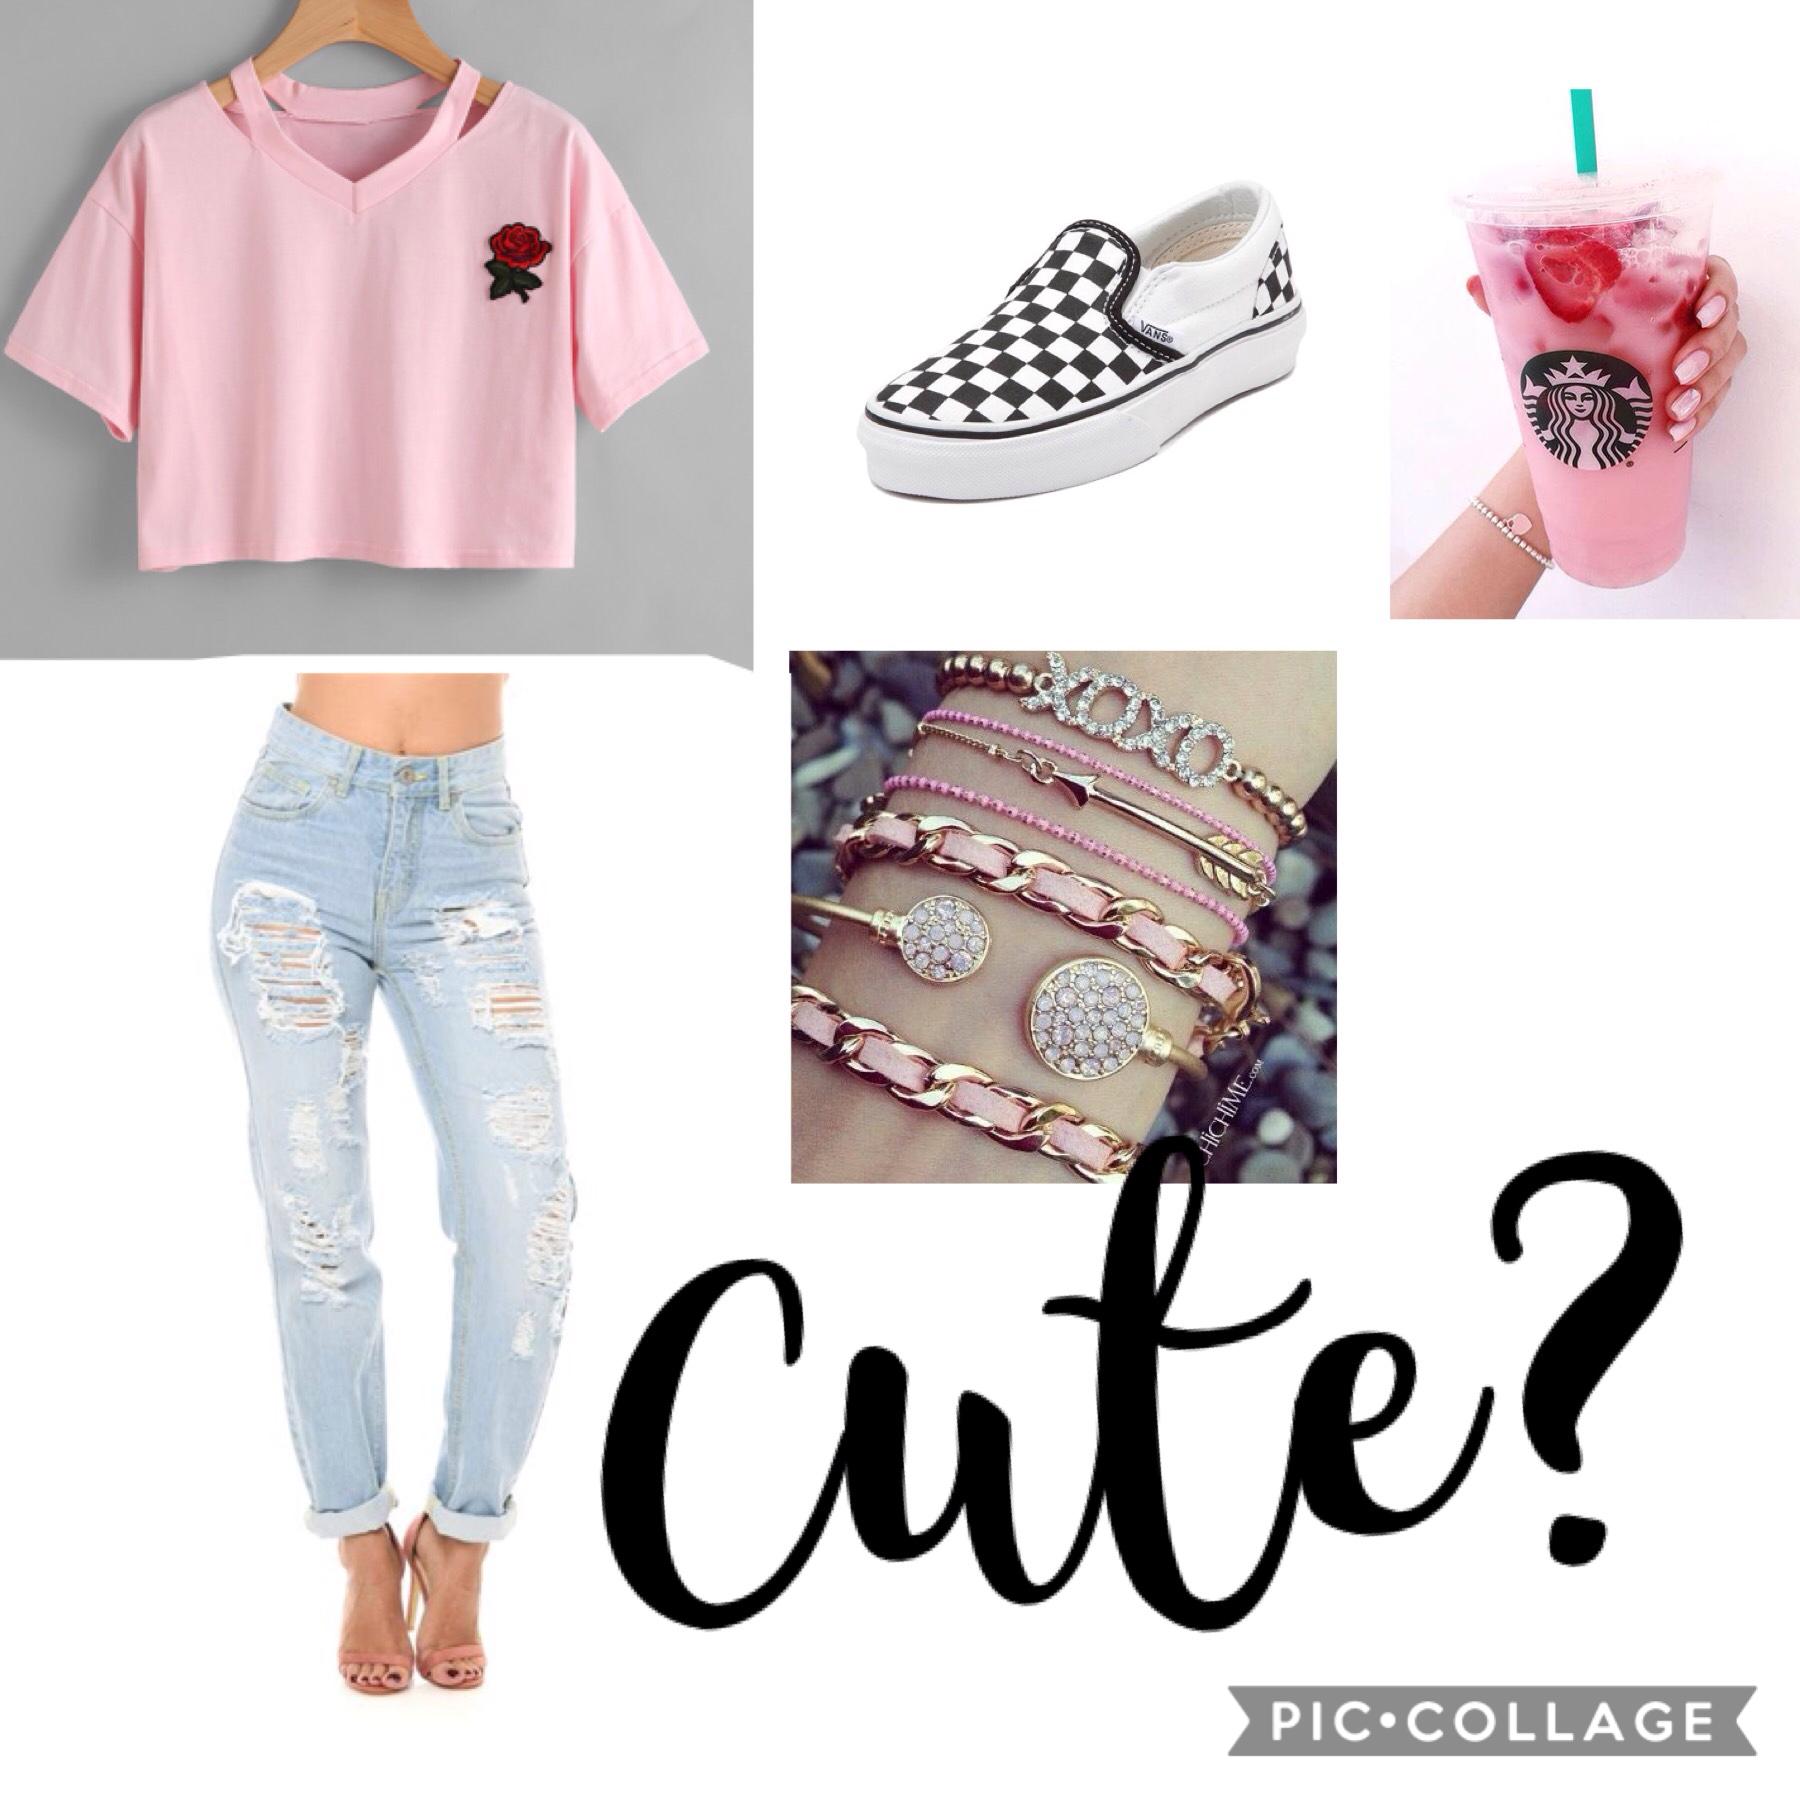 Like and comment if this is cute,please!❤️👍🏻